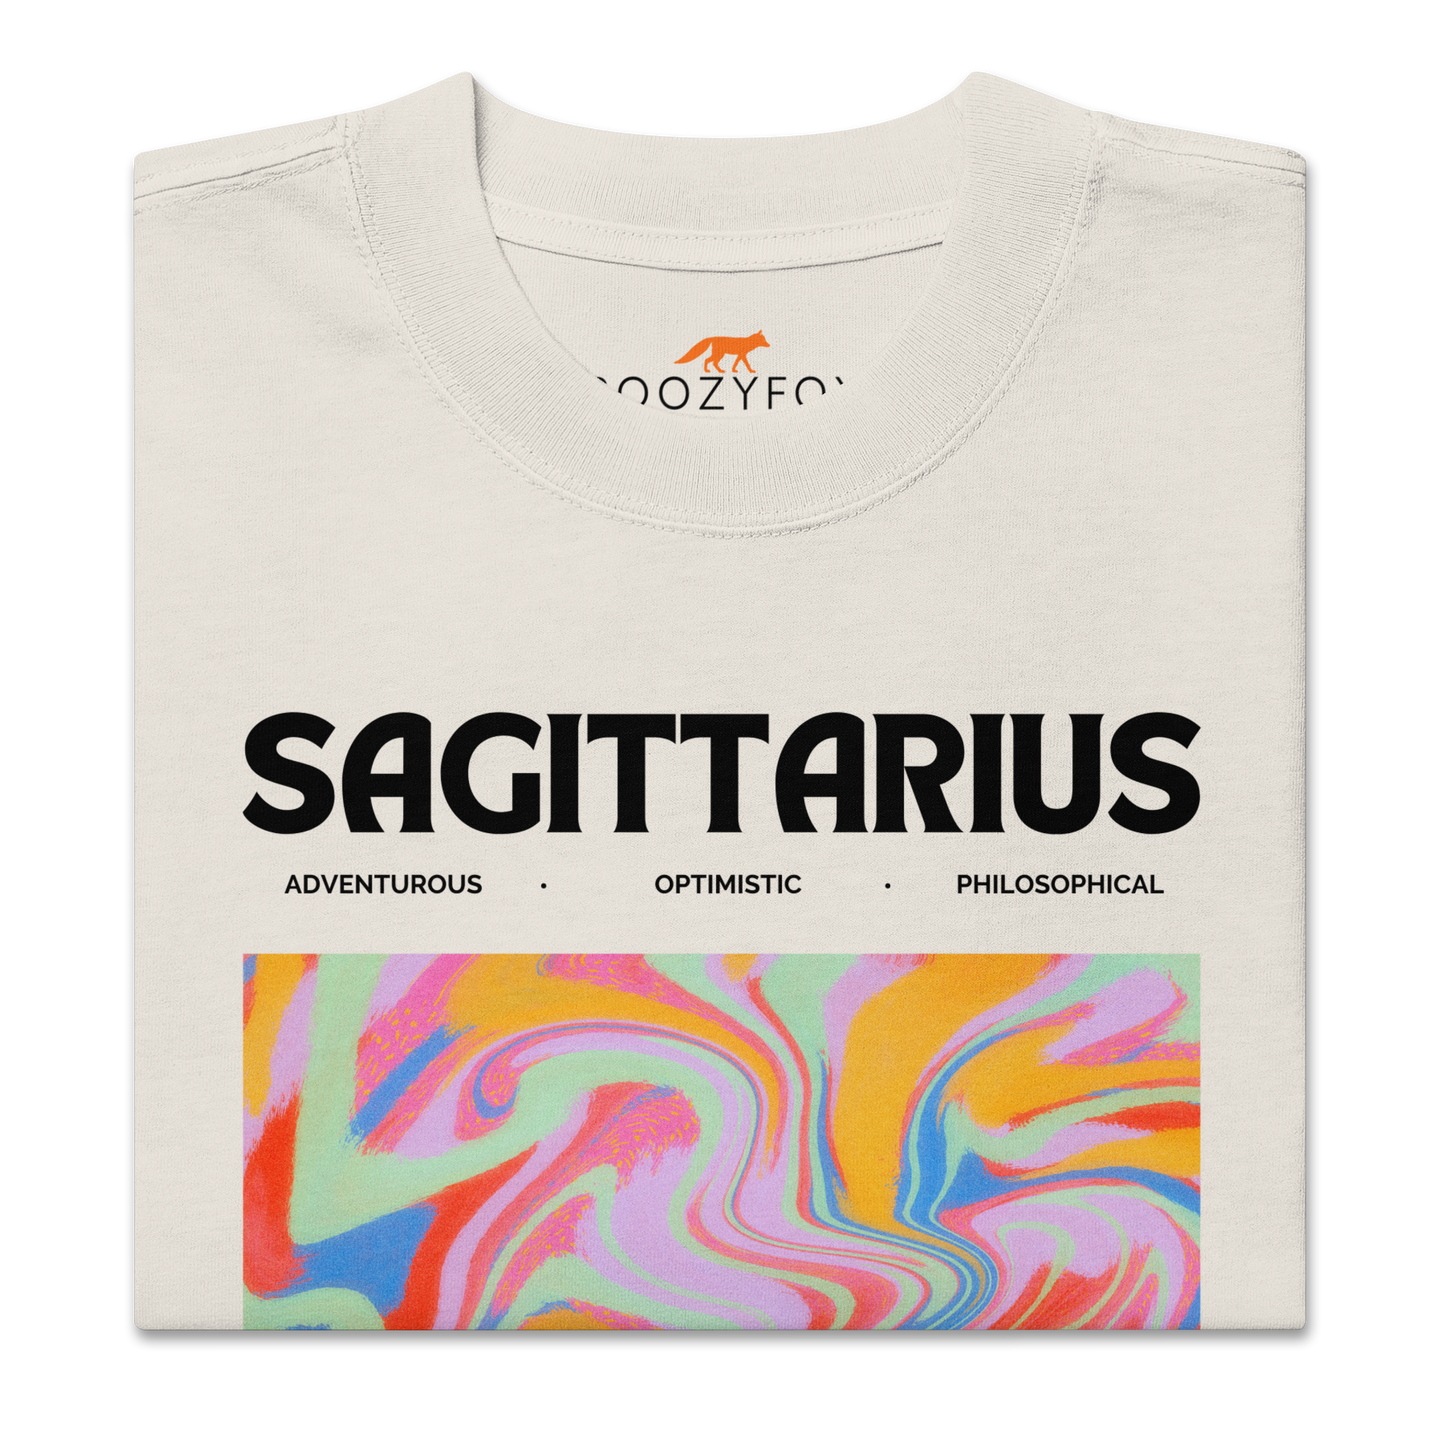 Front details of a Faded Bone Sagittarius Oversized T-Shirt featuring an Abstract Sagittarius Star Sign graphic on the chest - Cool Graphic Zodiac Oversized Tees - Boozy Fox